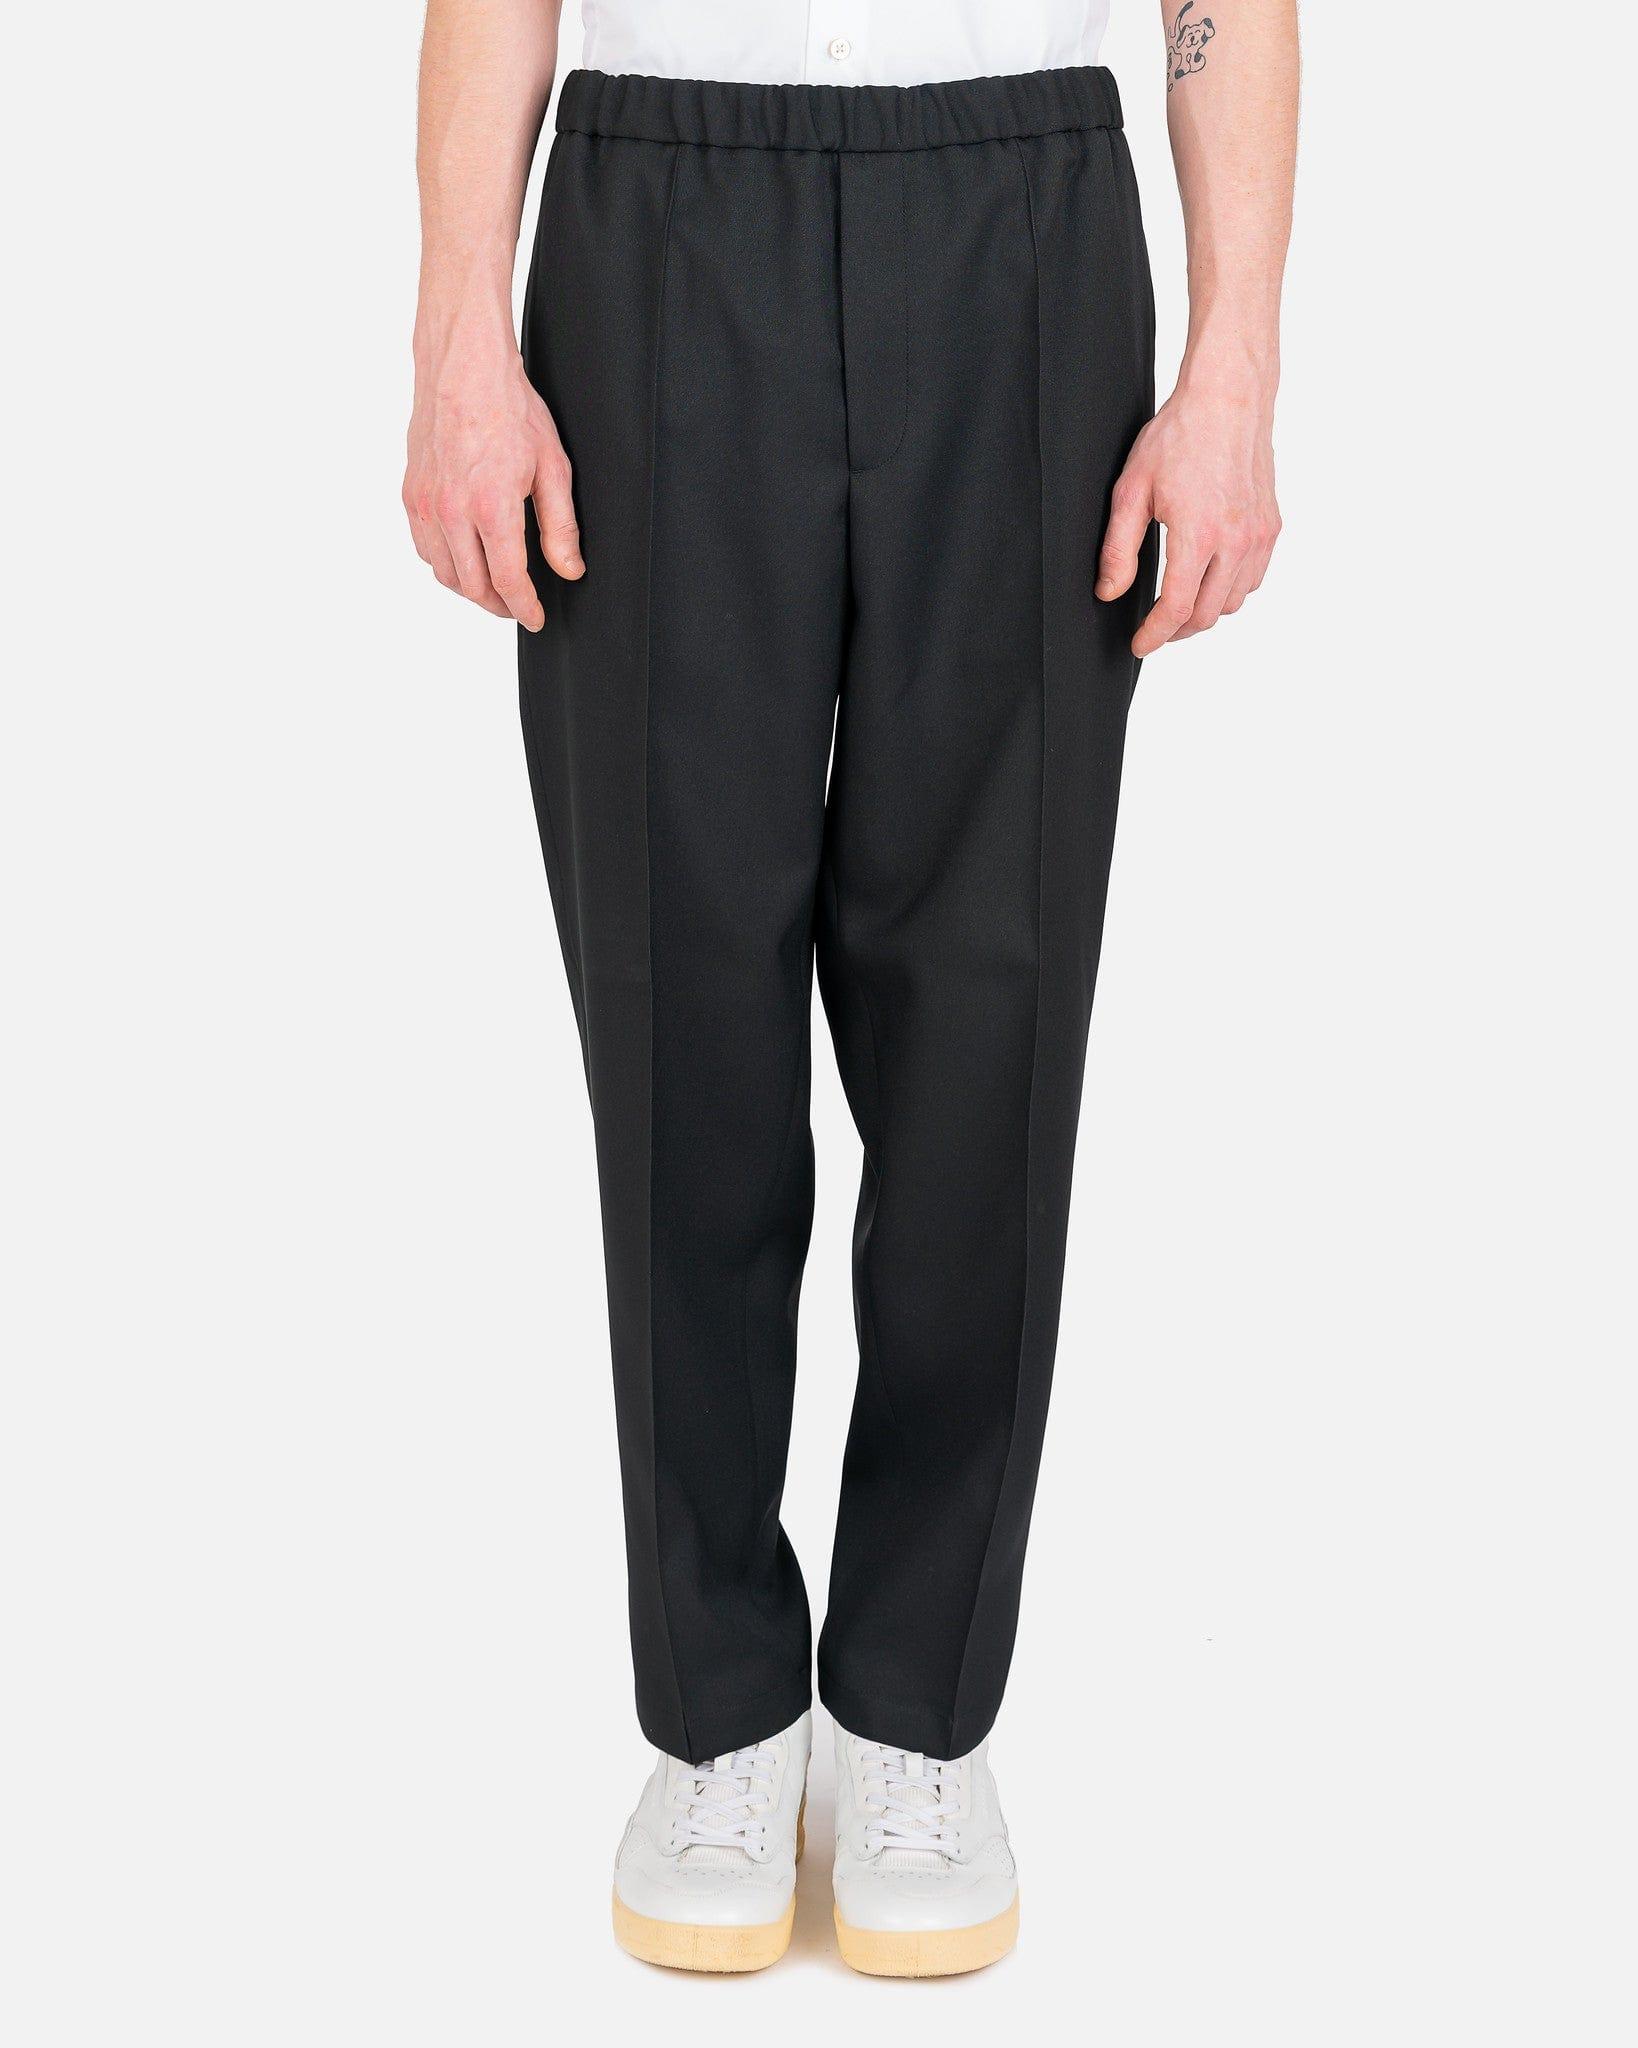 POST ARCHIVE FACTION (PAF) - 5.0 TROUSERS CENTER | HBX - Globally Curated  Fashion and Lifestyle by Hypebeast